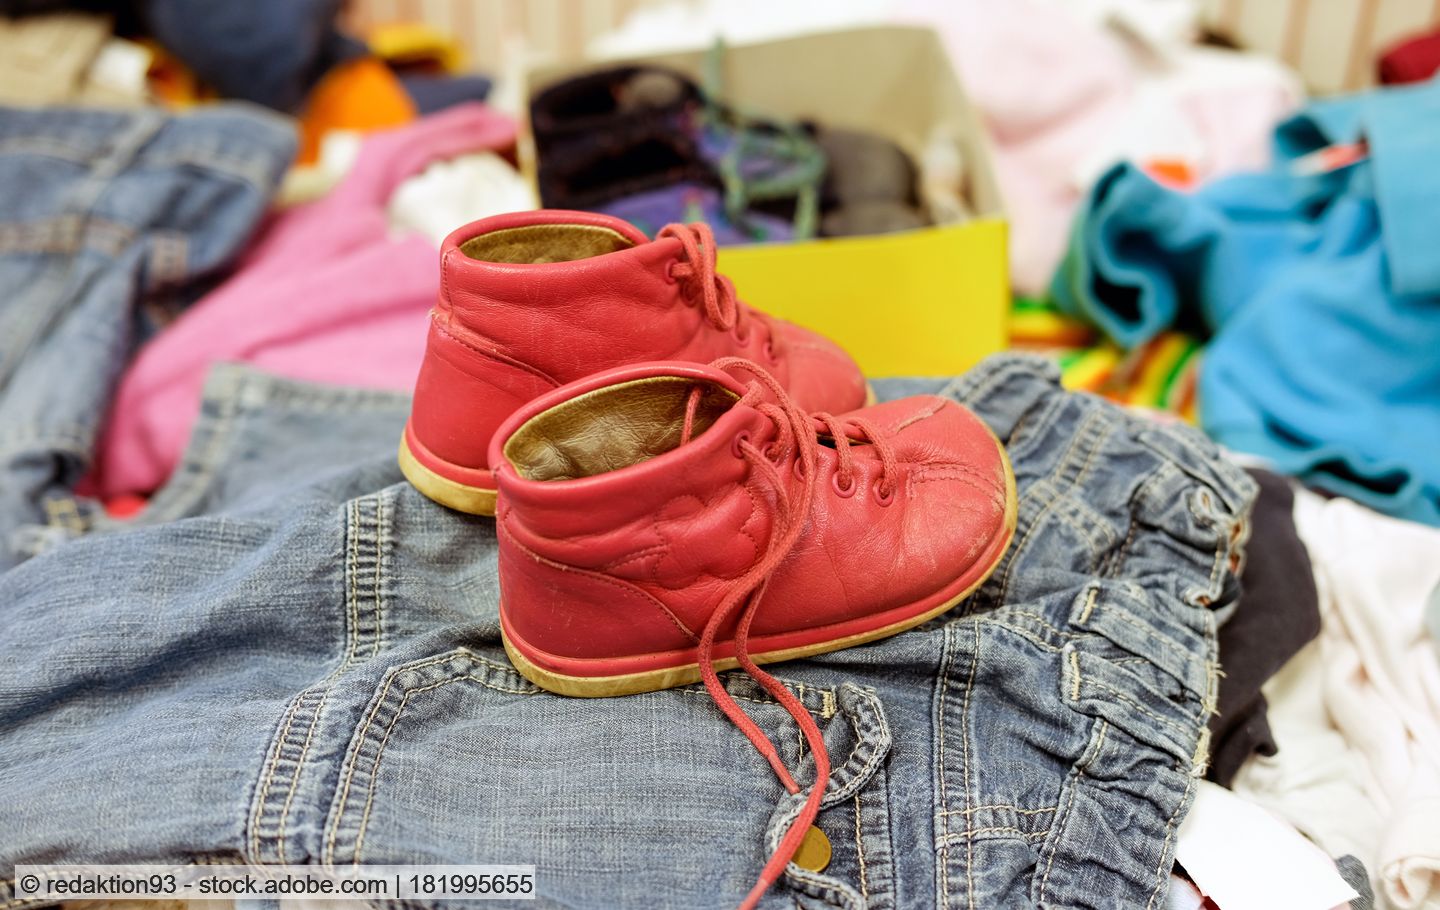 A pair of red baby shoes stand on top of a pile of second hand clothes